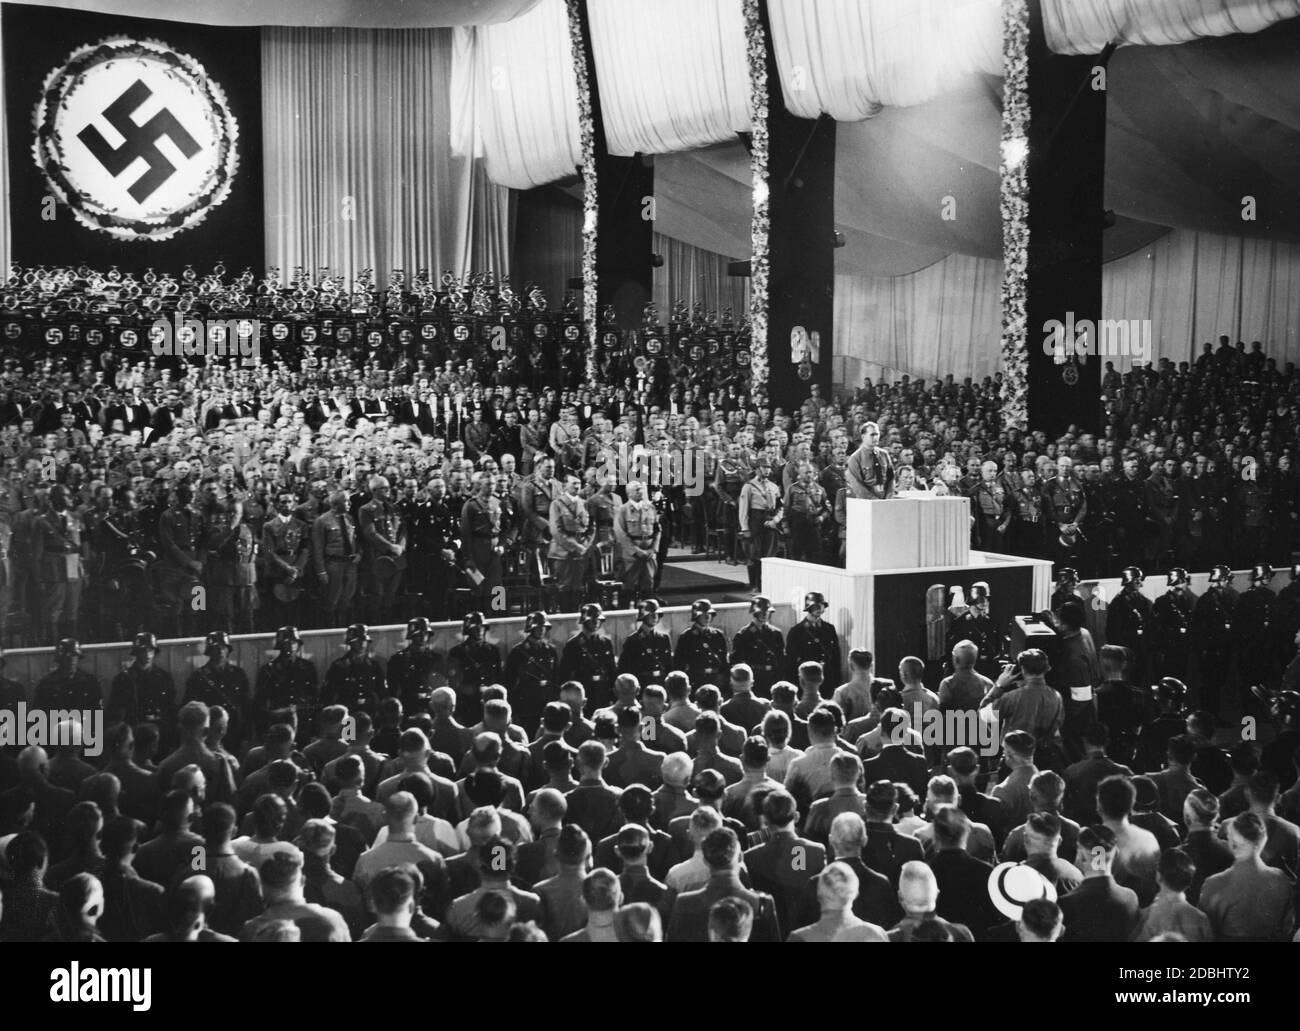 Rudolf Hess gives a speech in the Nuremberg Luitpoldhalle at the opening of the party congress of the NSDAP, here in memory of the late Reich President Paul von Hindenburg. In the 1st row, from right (left side): Julius Streicher, Adolf Hitler (behind him Wilhelm Brueckner), Viktor Lutze, Heinrich Himmler, Franz Xaver Schwarz, Robert Ley, Joseph Goebbels. Right side next to Rudolf Hess: Hermann Goering. Stock Photo